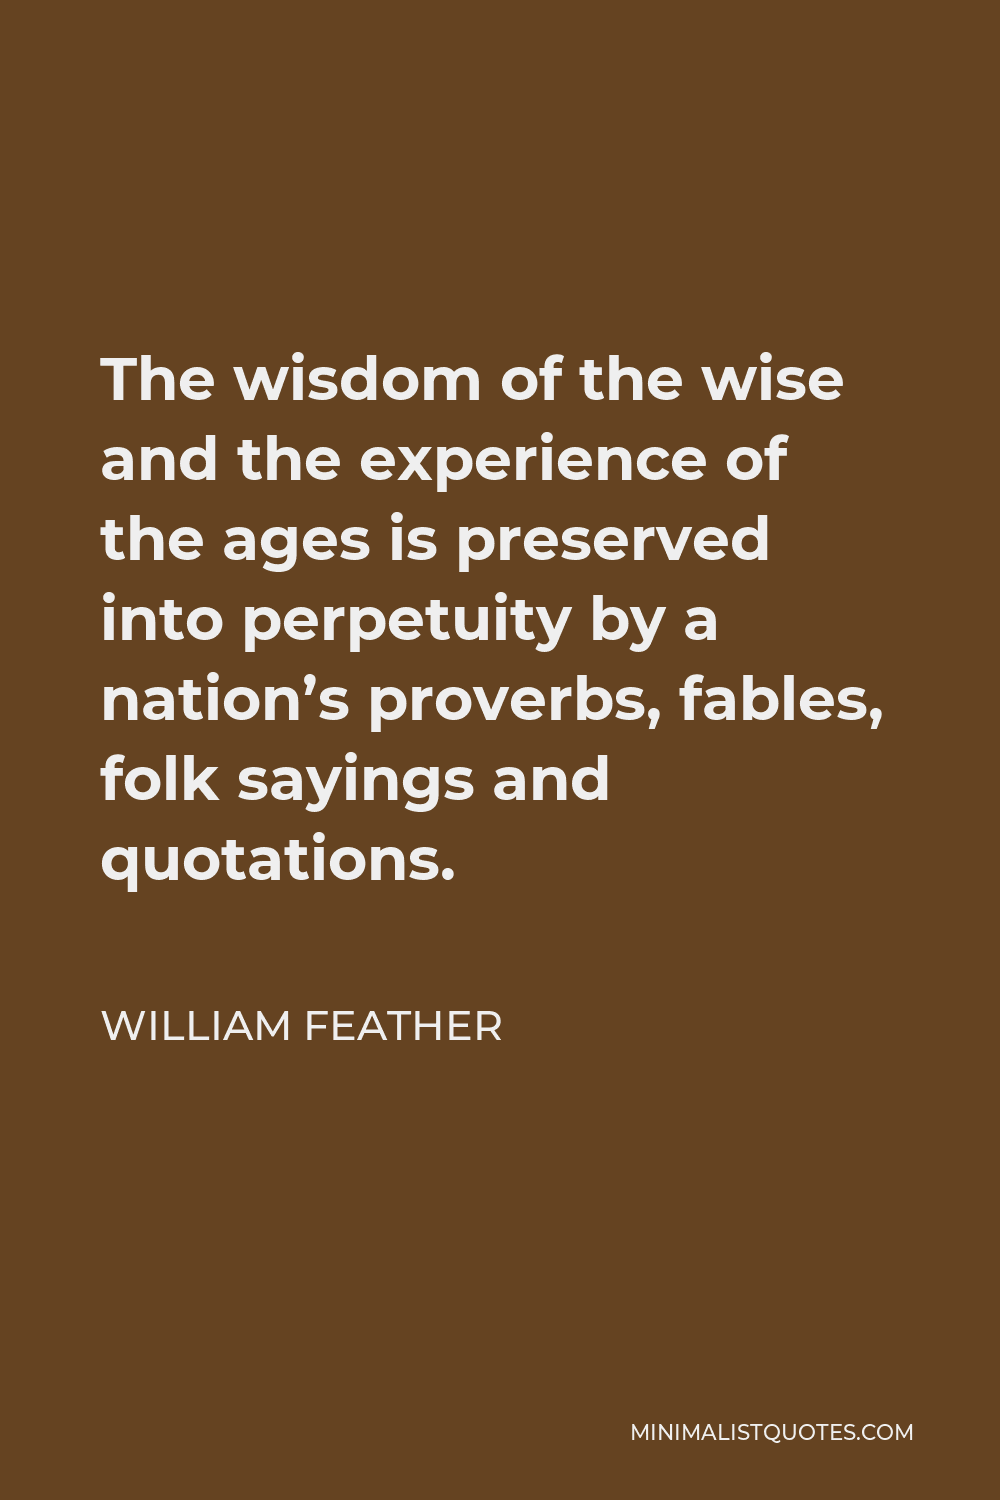 William Feather Quote - The wisdom of the wise and the experience of the ages is preserved into perpetuity by a nation’s proverbs, fables, folk sayings and quotations.